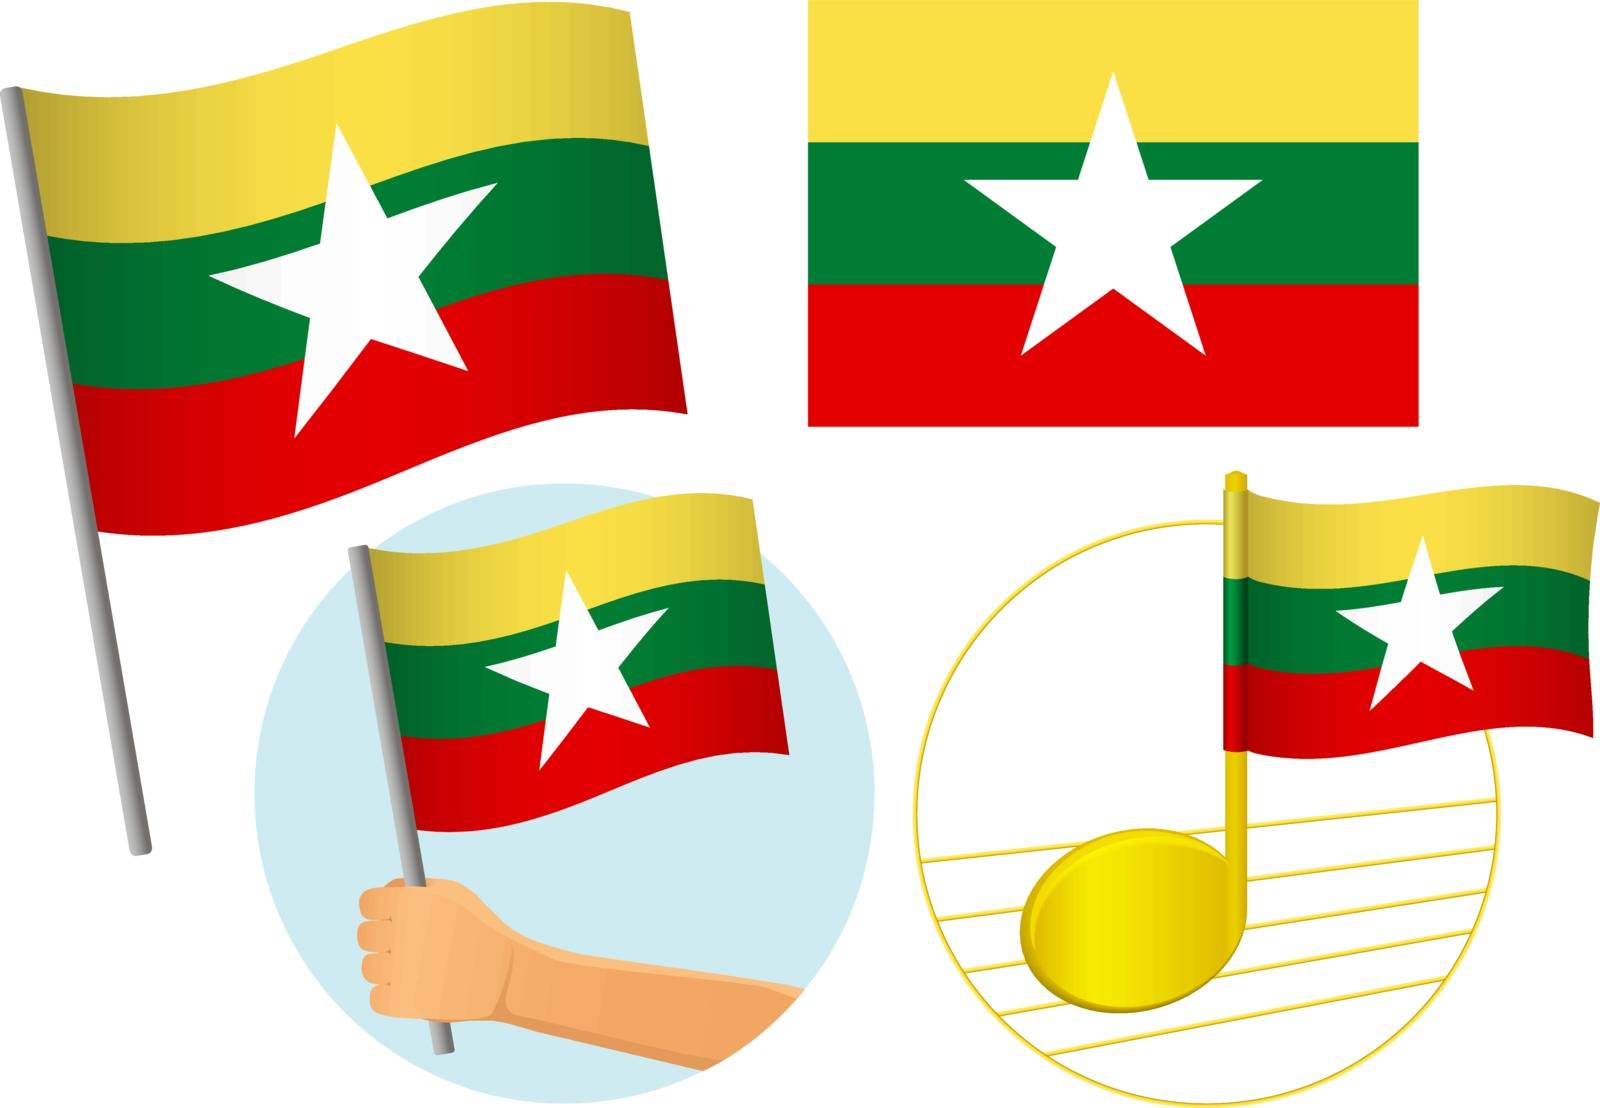 Burma flag icon set by Visual-Content